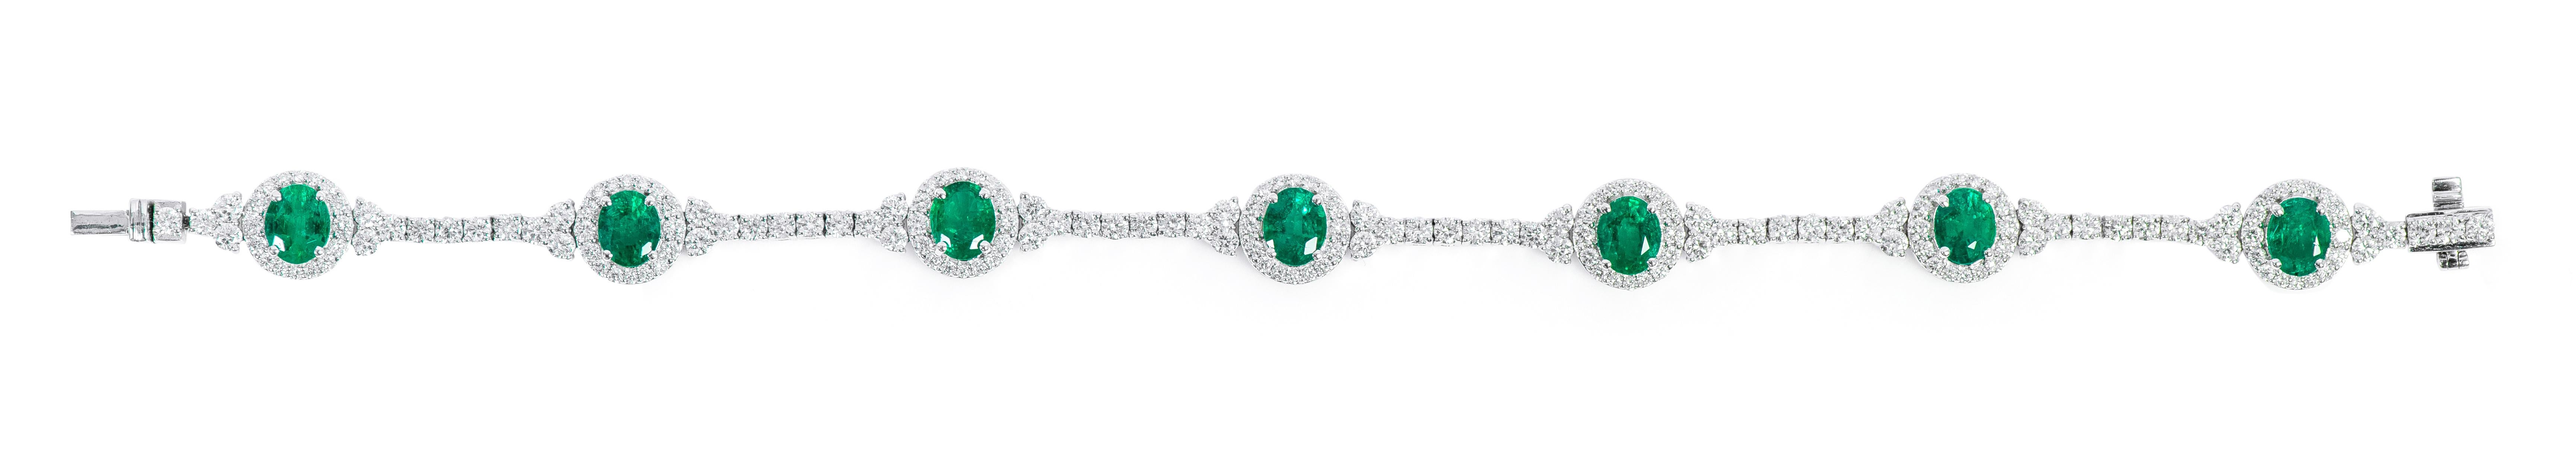 18 Karat White Gold 4.17 Carat Natural Emerald and Diamond Cluster Tennis Bracelet

This impeccable diamond solitaire and forest green emerald tennis bracelet is special. The diamond round solitaires in a 4-prong setting form the core of the